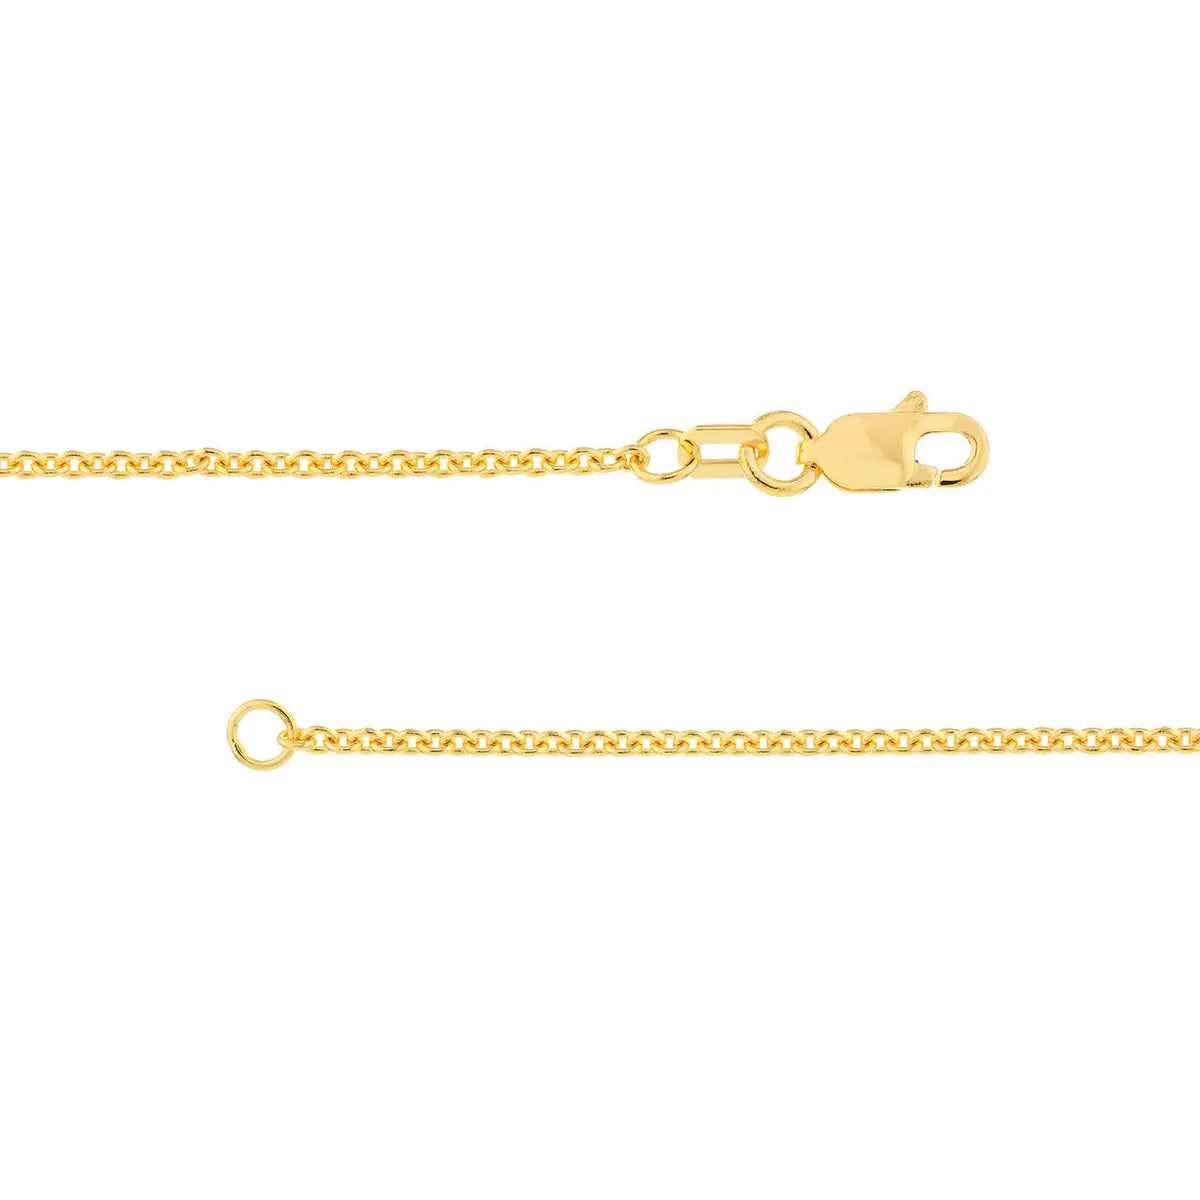 1.5mm 14K Gold Cable Chain - The Diamond Shoppe